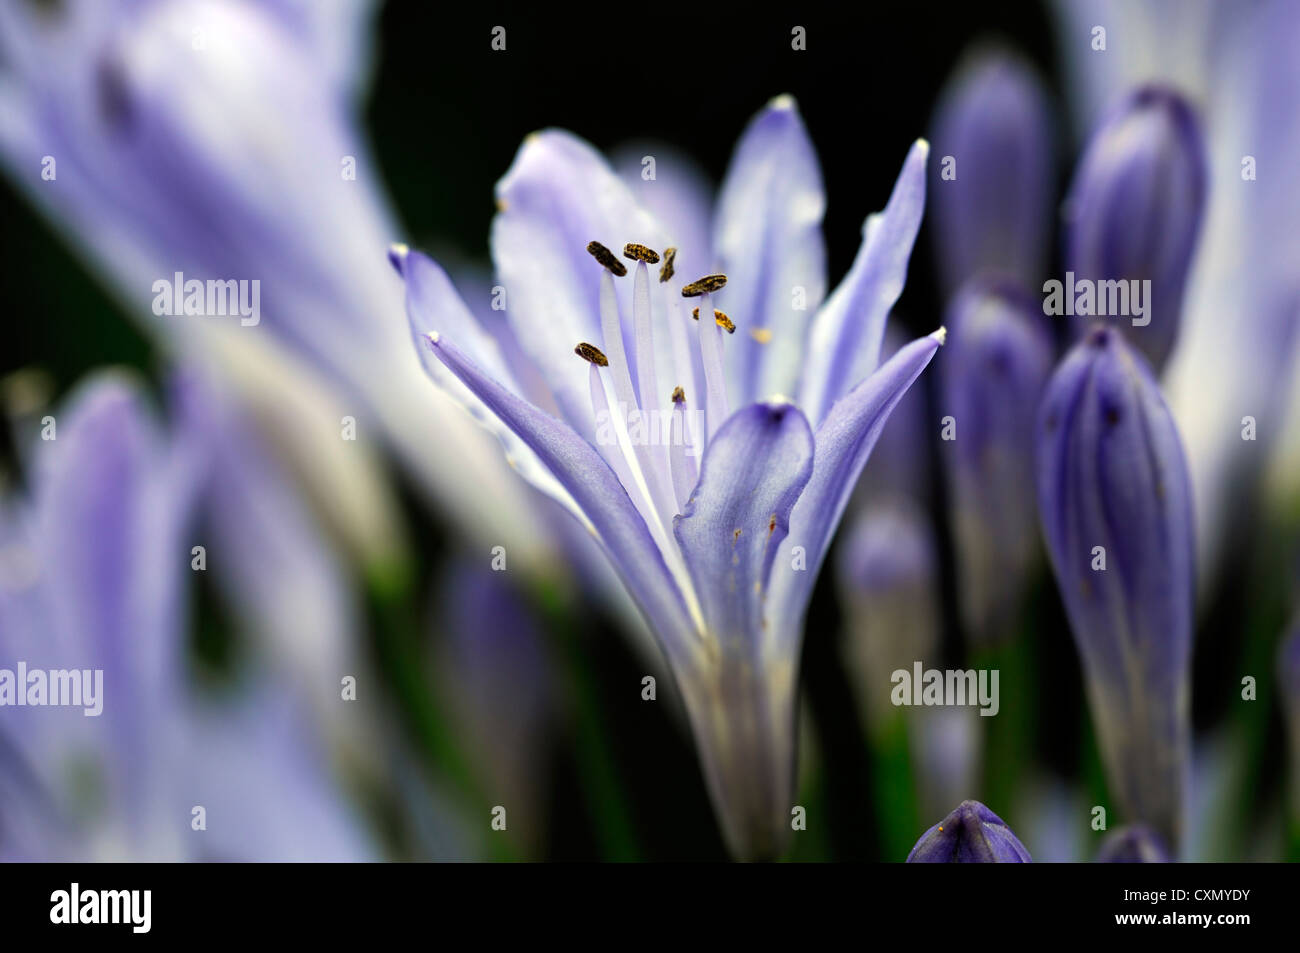 agapanthus africanus blue lily flowers flowering blooms closeups close-ups ups graphic perennials african lily backlit glow Stock Photo